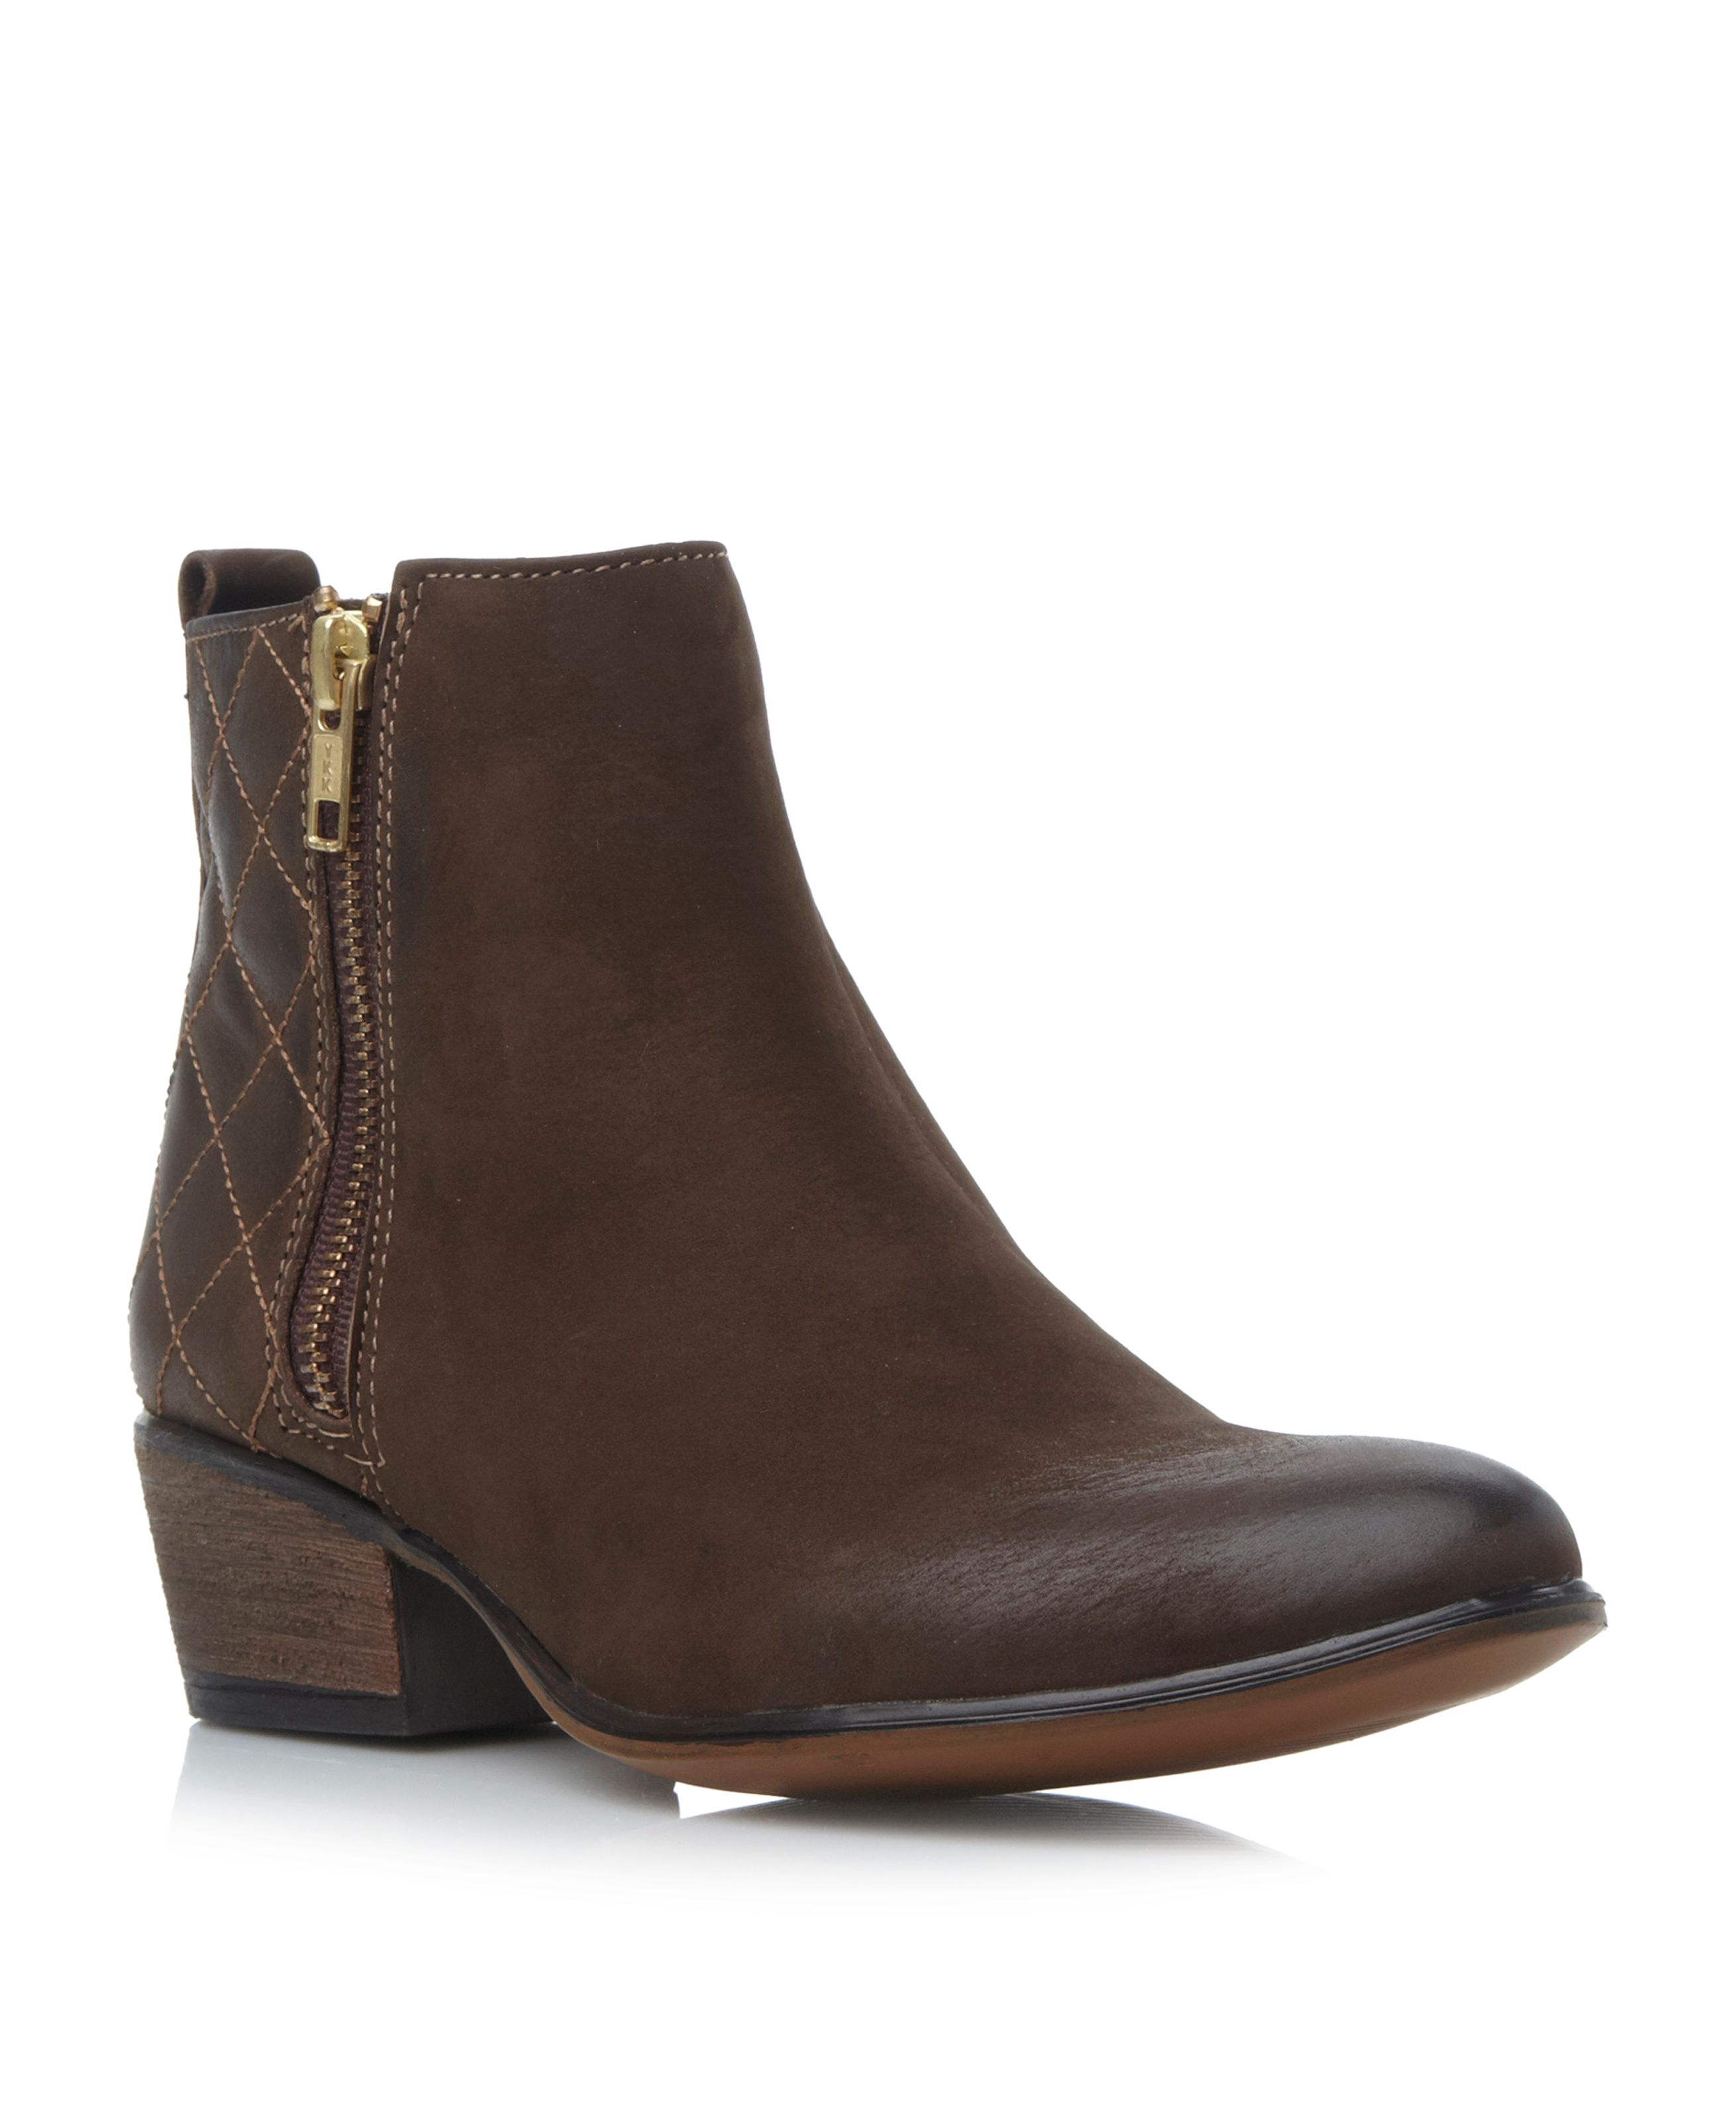 Steve Madden Nyrvana Sm Quilt Detail Ankle Boot in Brown | Lyst